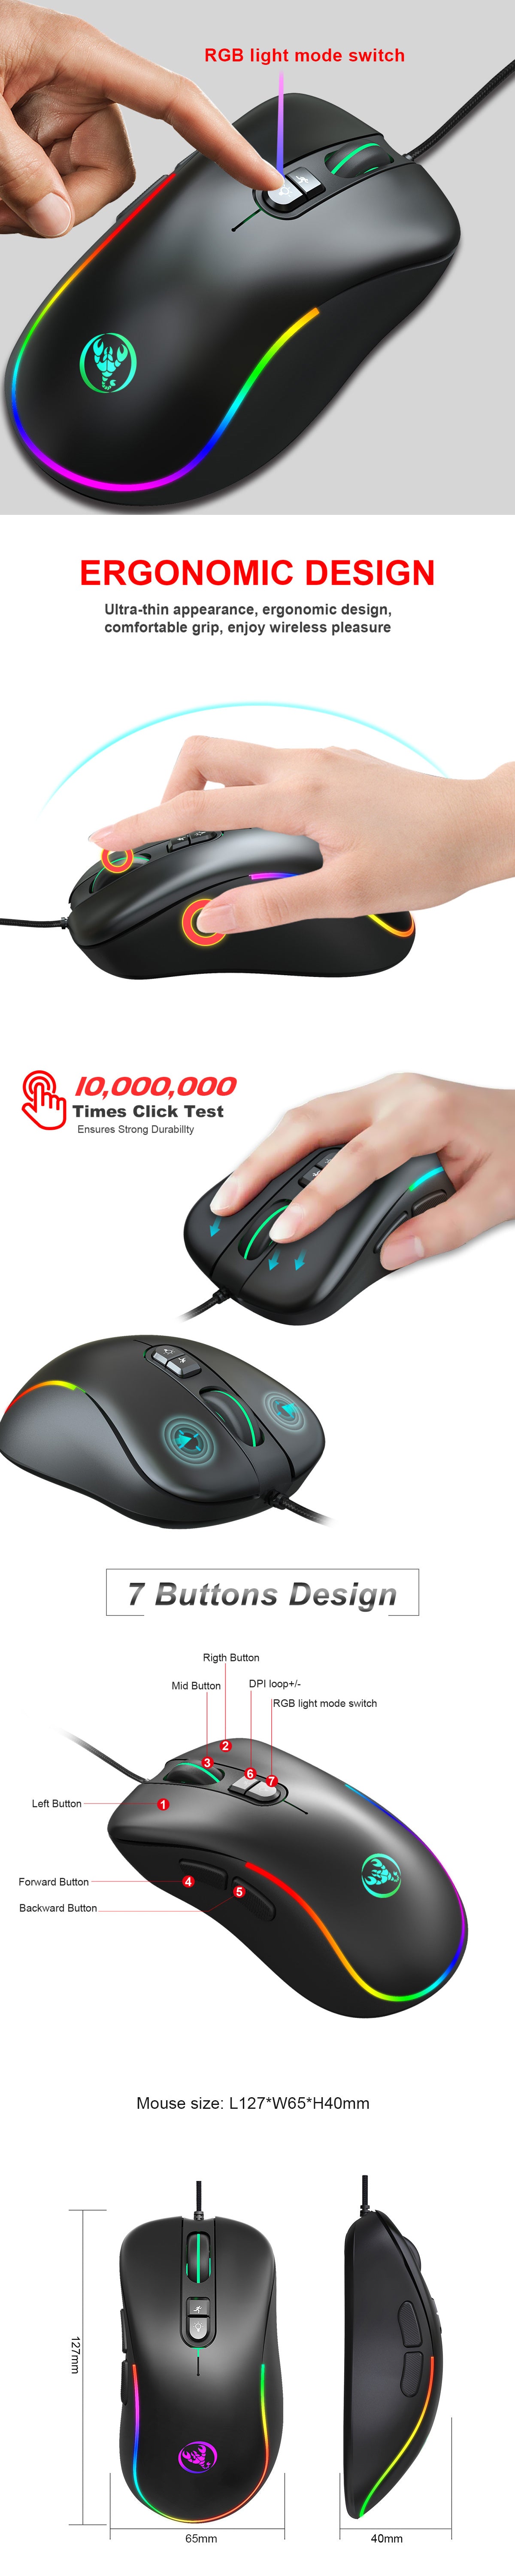 HXSJ J300 Wired Gaming Mouse 7 Button Macro Programming Mouse 6400DPI Colorful RGB Backlight USB Wired Mouse